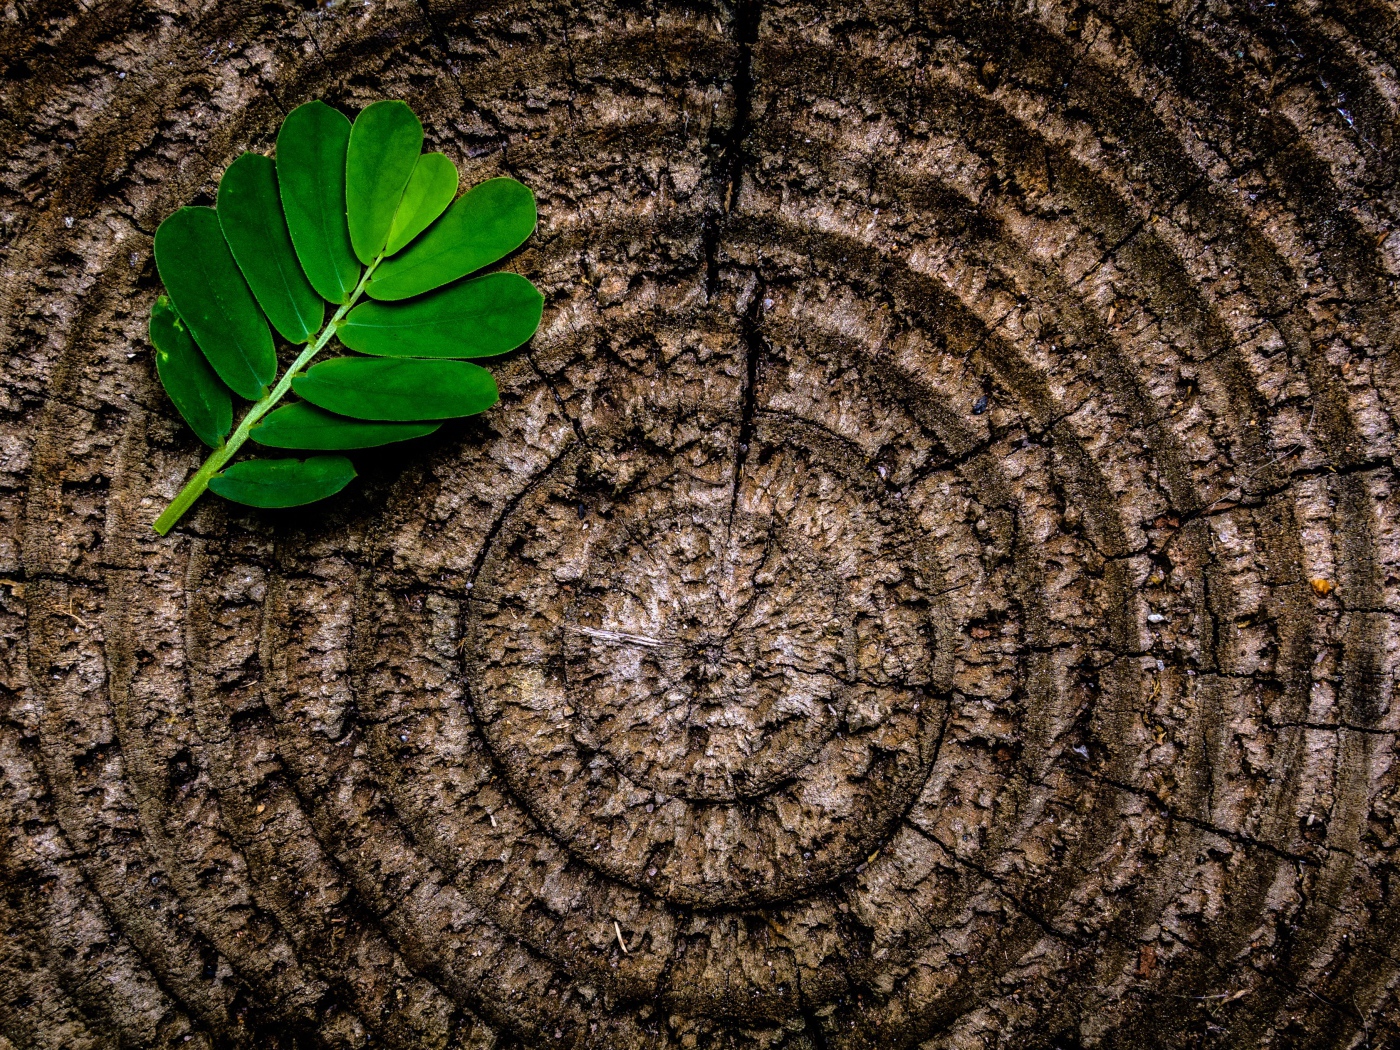 Rings on a tree stump with a green leaf